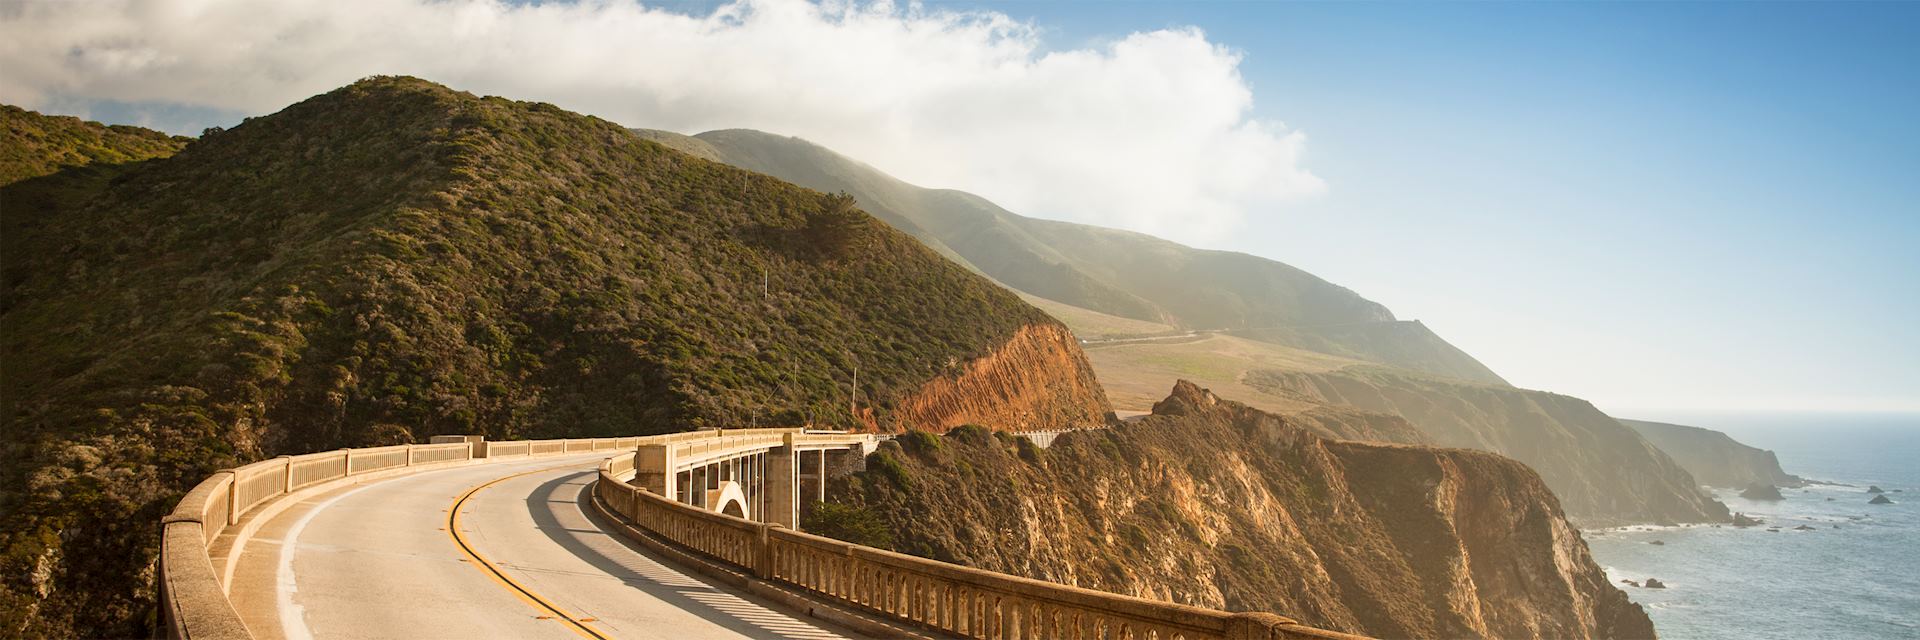 https://media.audleytravel.com/-/media/images/home/canada-and-the-usa/usa/super-regions/california/country-guides/driving-californias-pacific-coast-highway/istock_89486111_usa_bixby_creek_bridge_on_highway_one_letterbox.jpg?q=79&w=1920&h=640